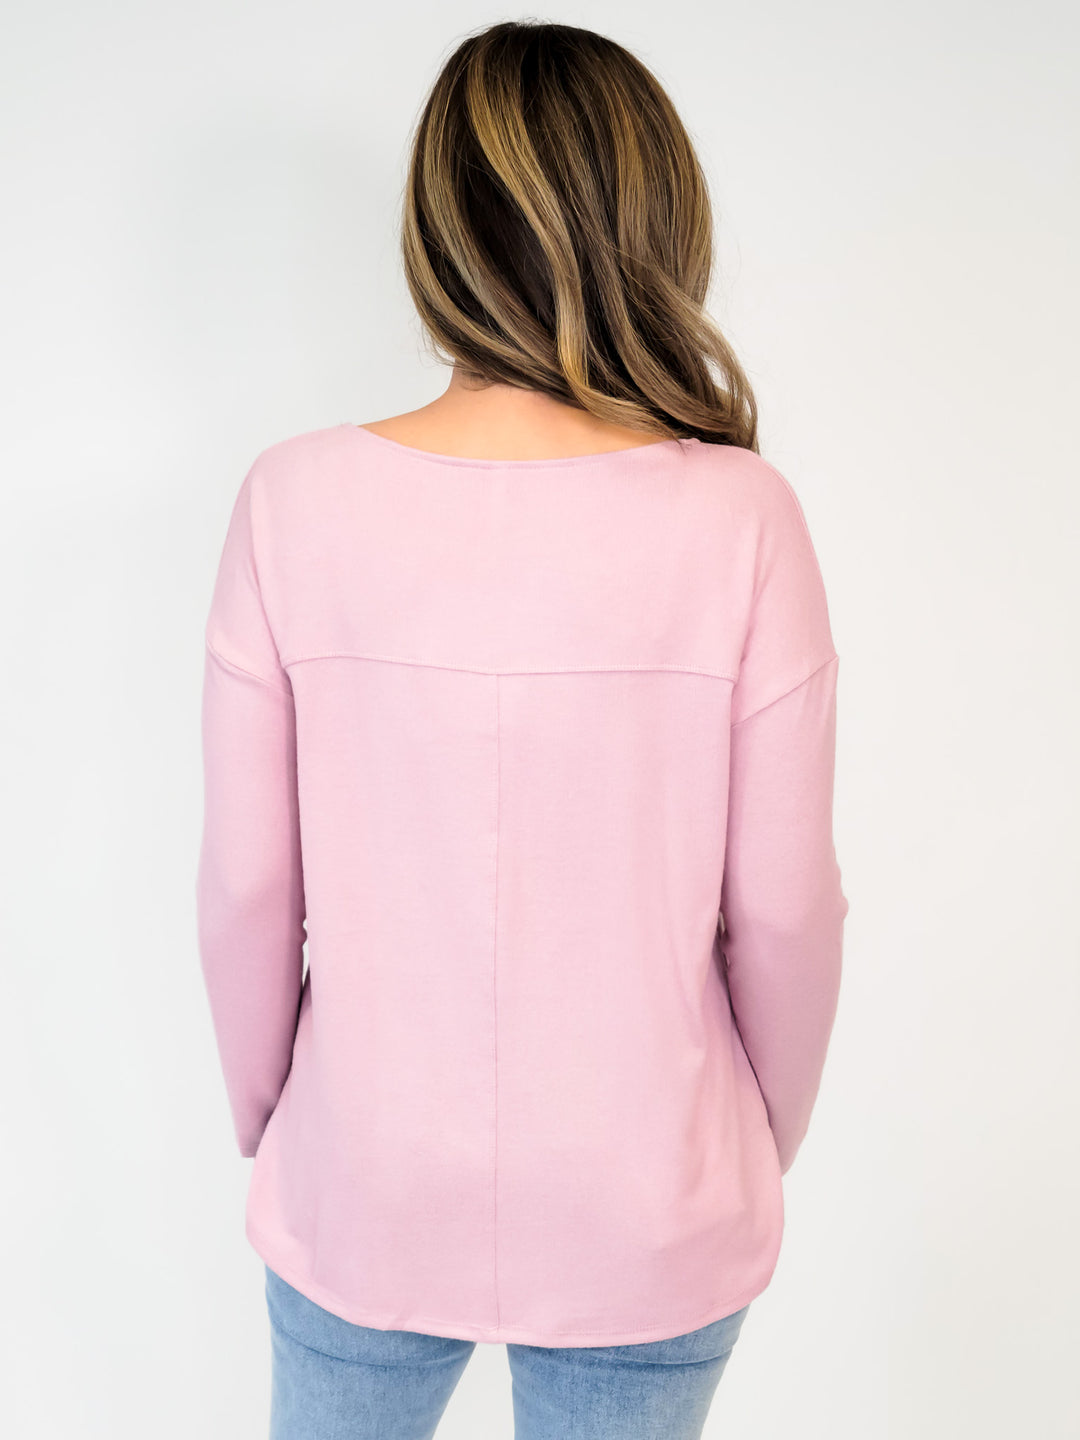 LONG SLEEVE WIDE NECK TOP - ROSE PINK